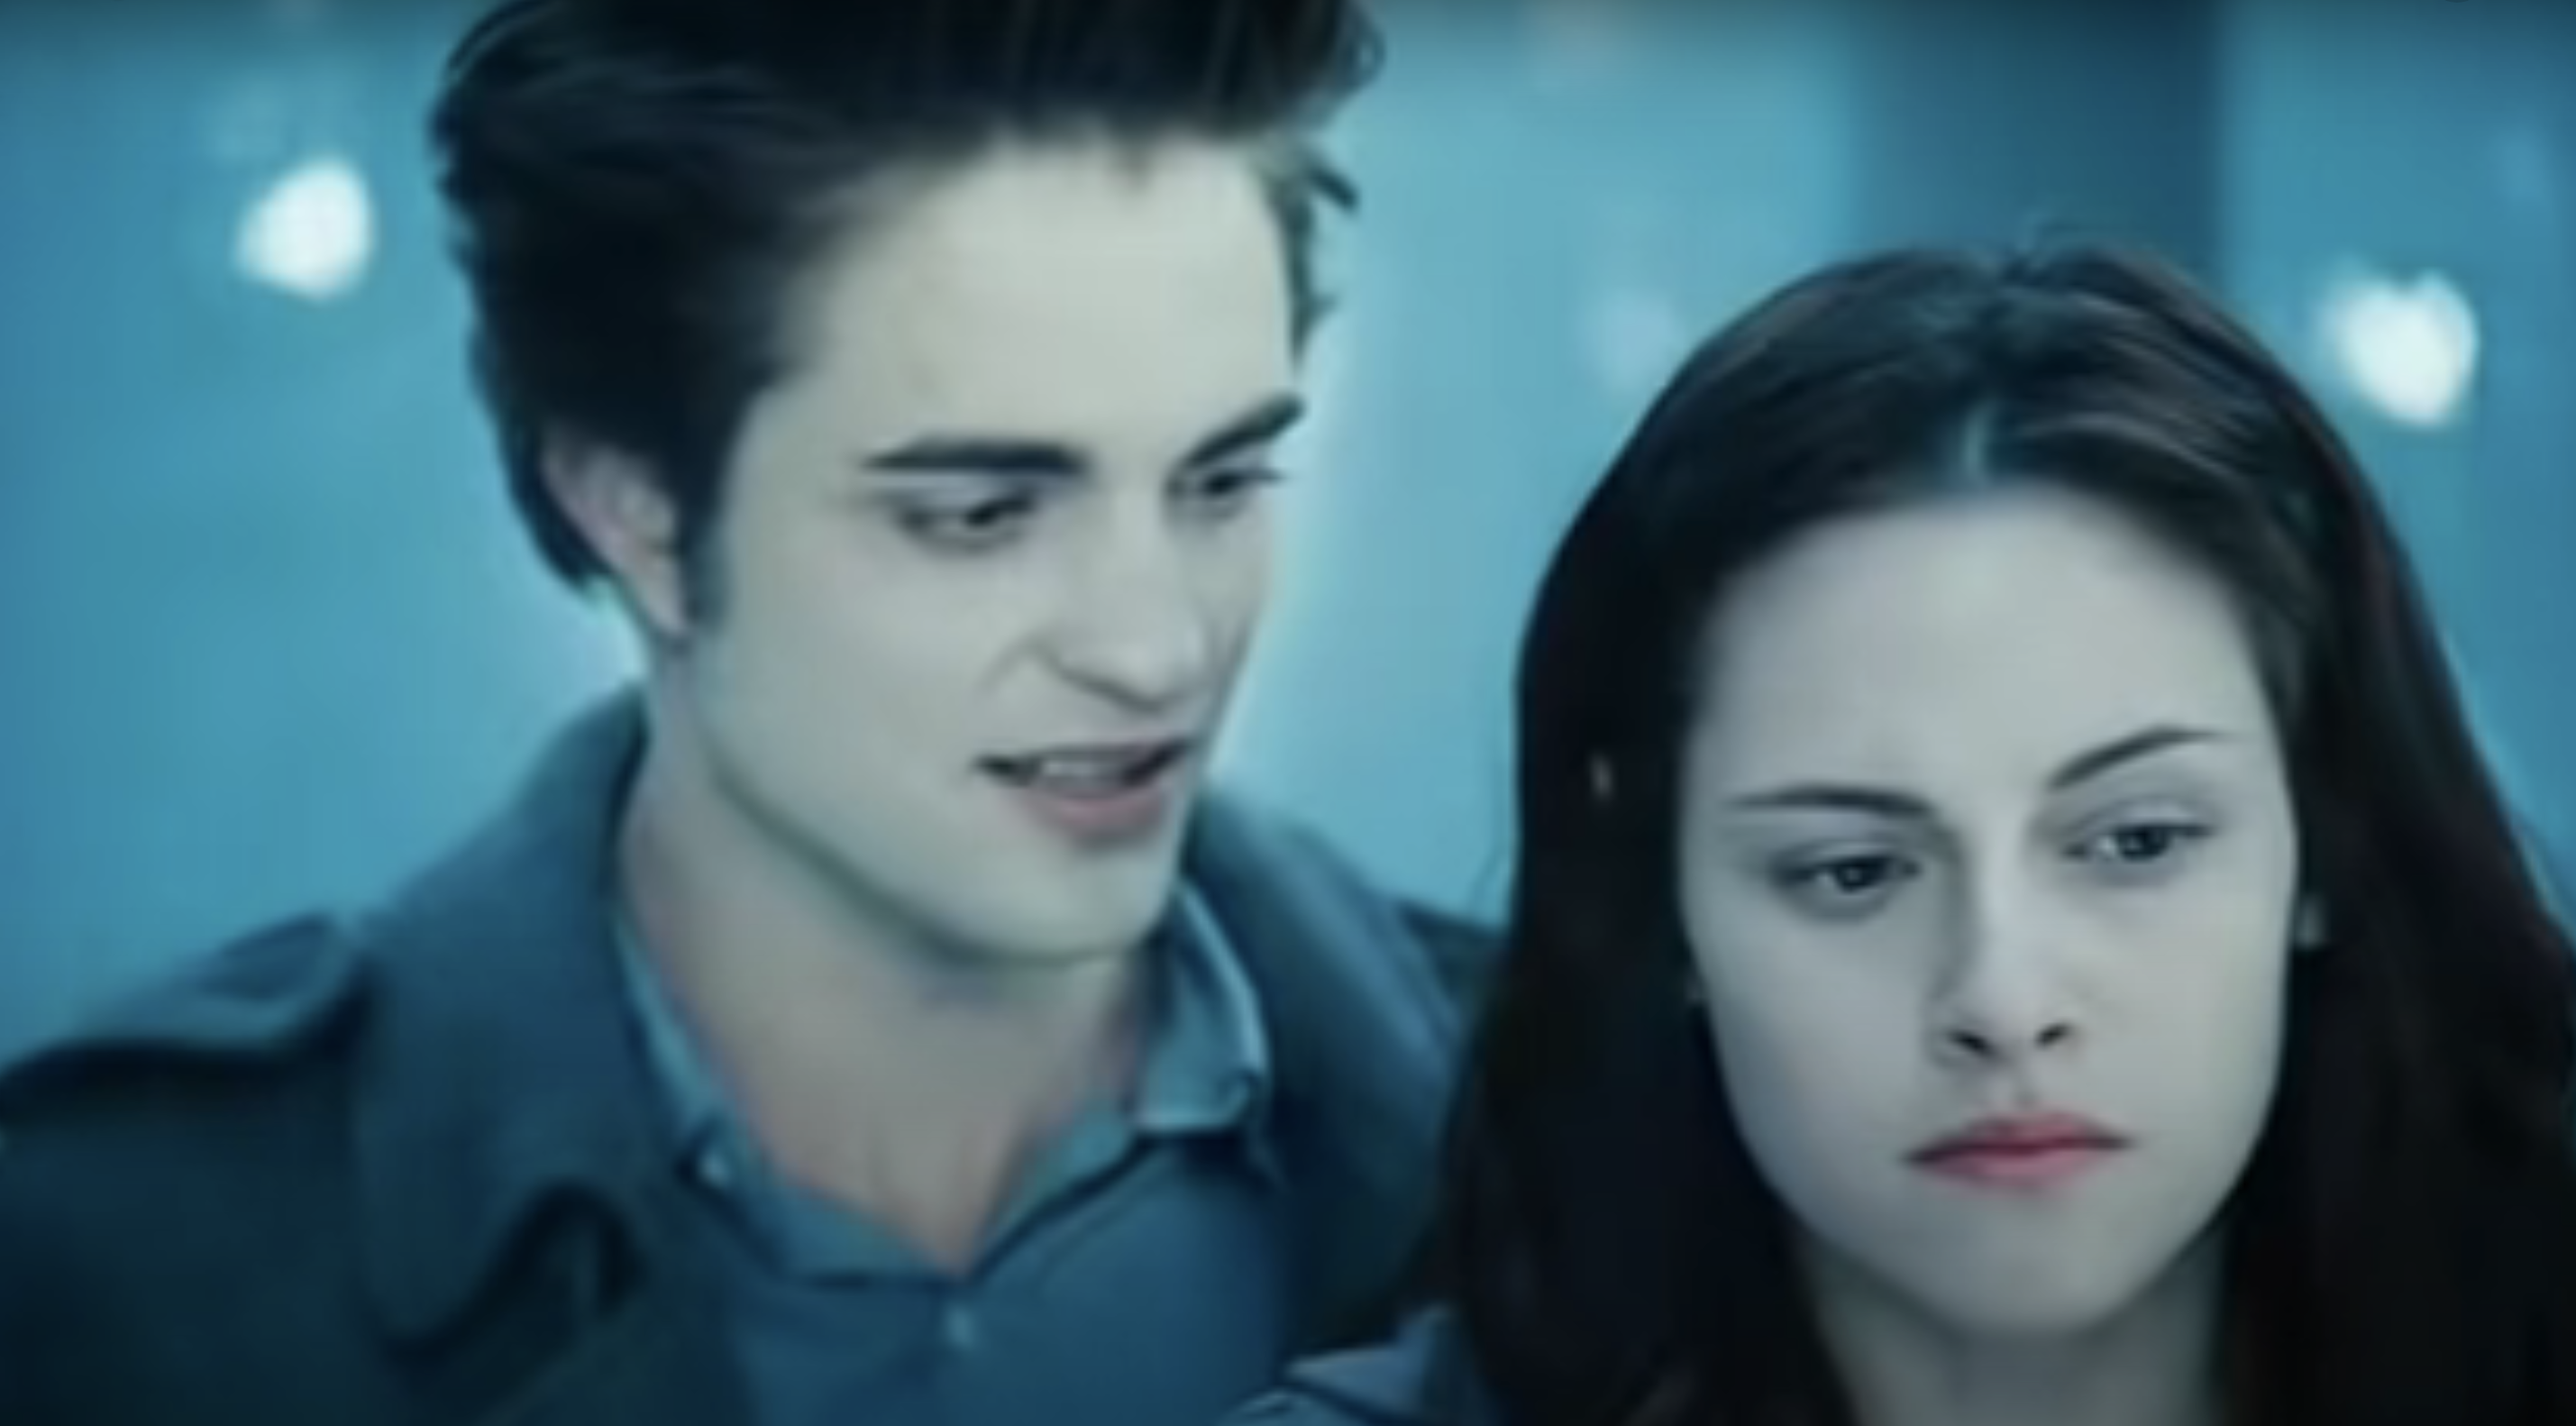 Edward Cullen and Bella Swan in a close-up from Twilight, showing intense expressions